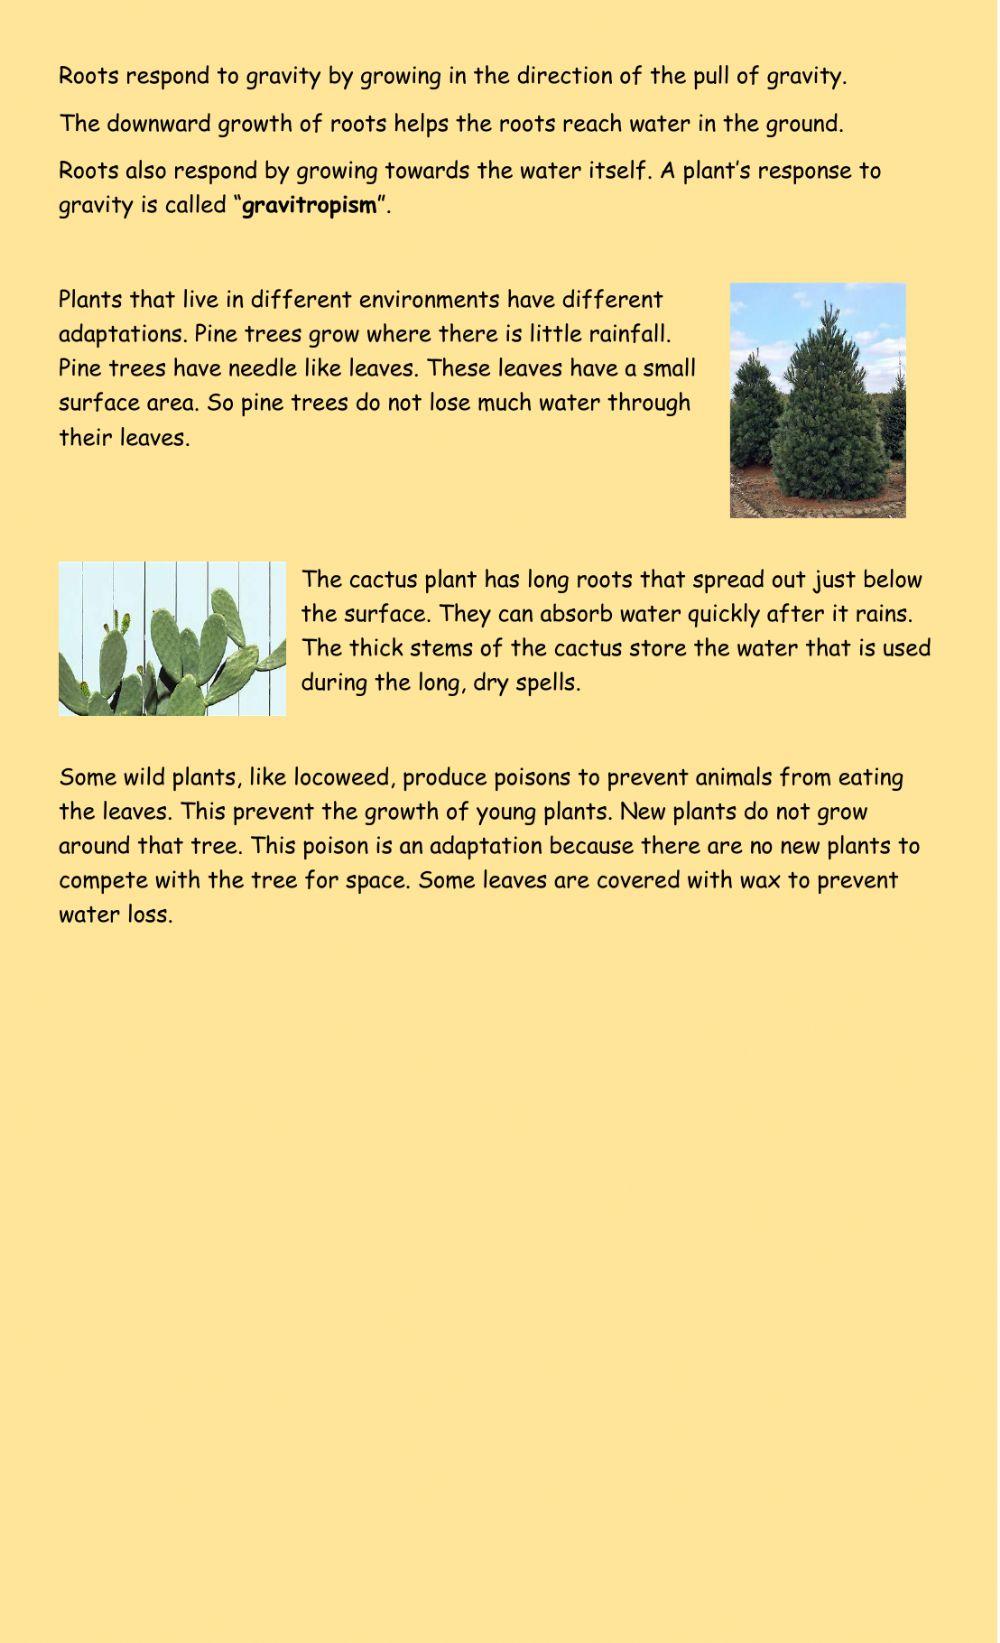 Plant Growth and Response